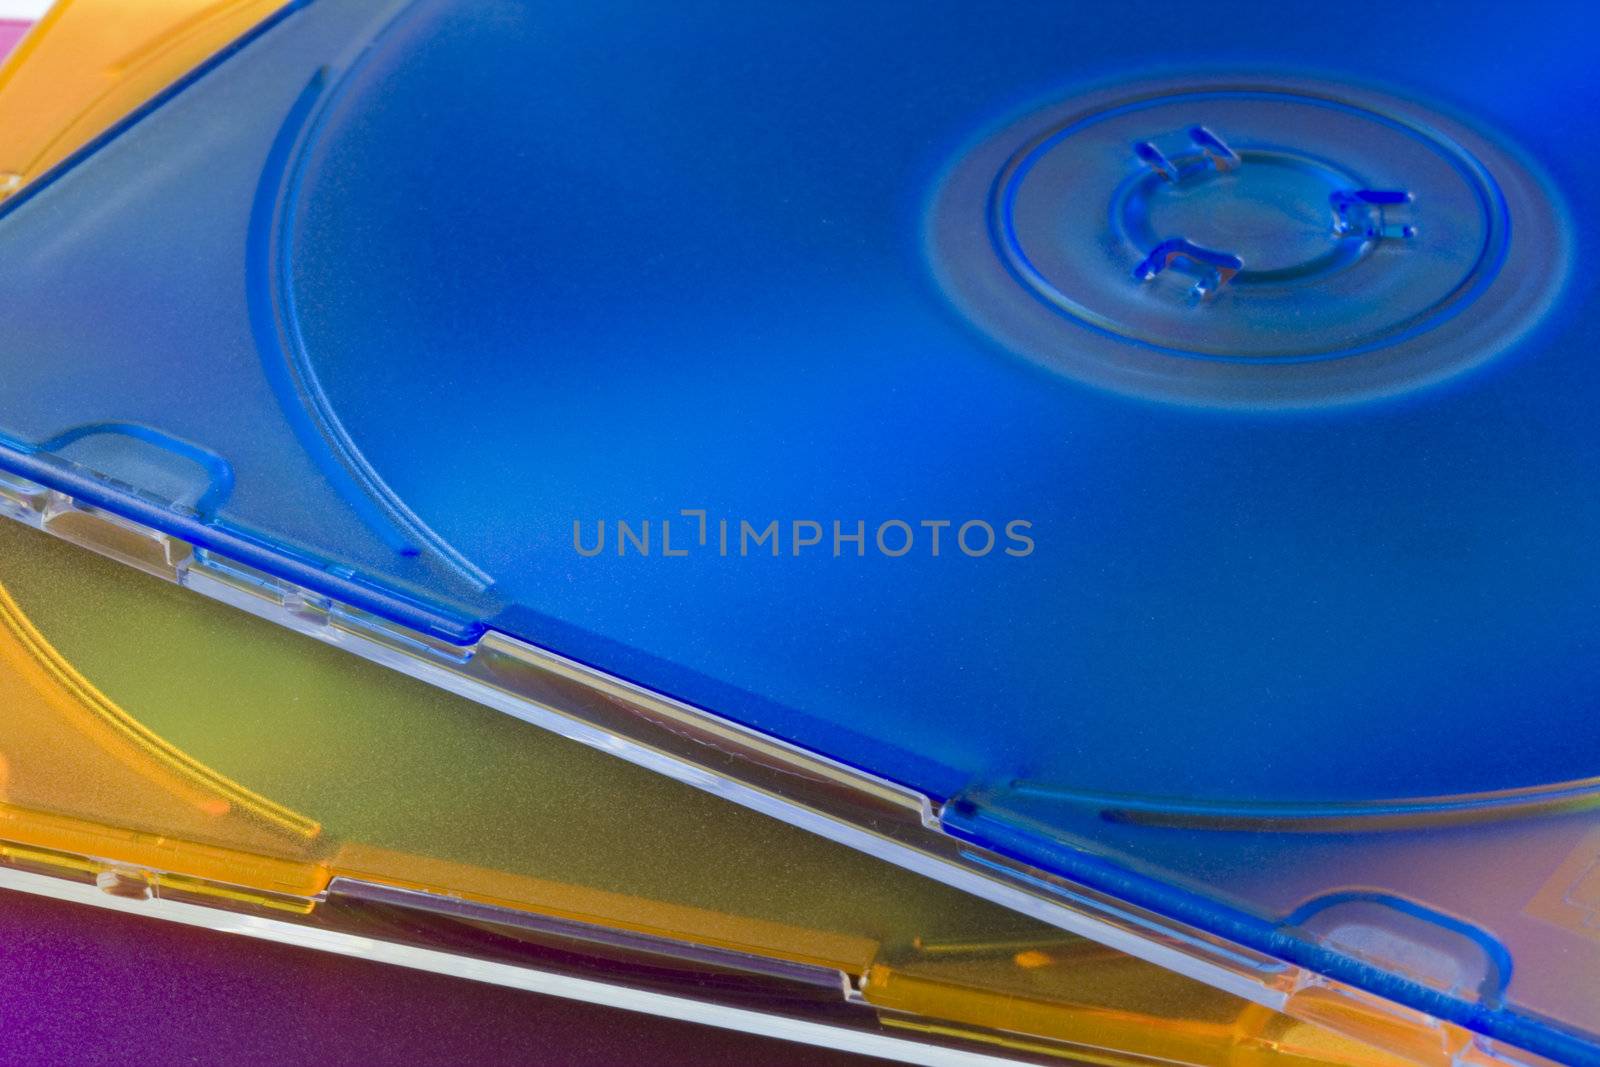 three CD or DVD optical disks in blue, orange and magenta jewel cases